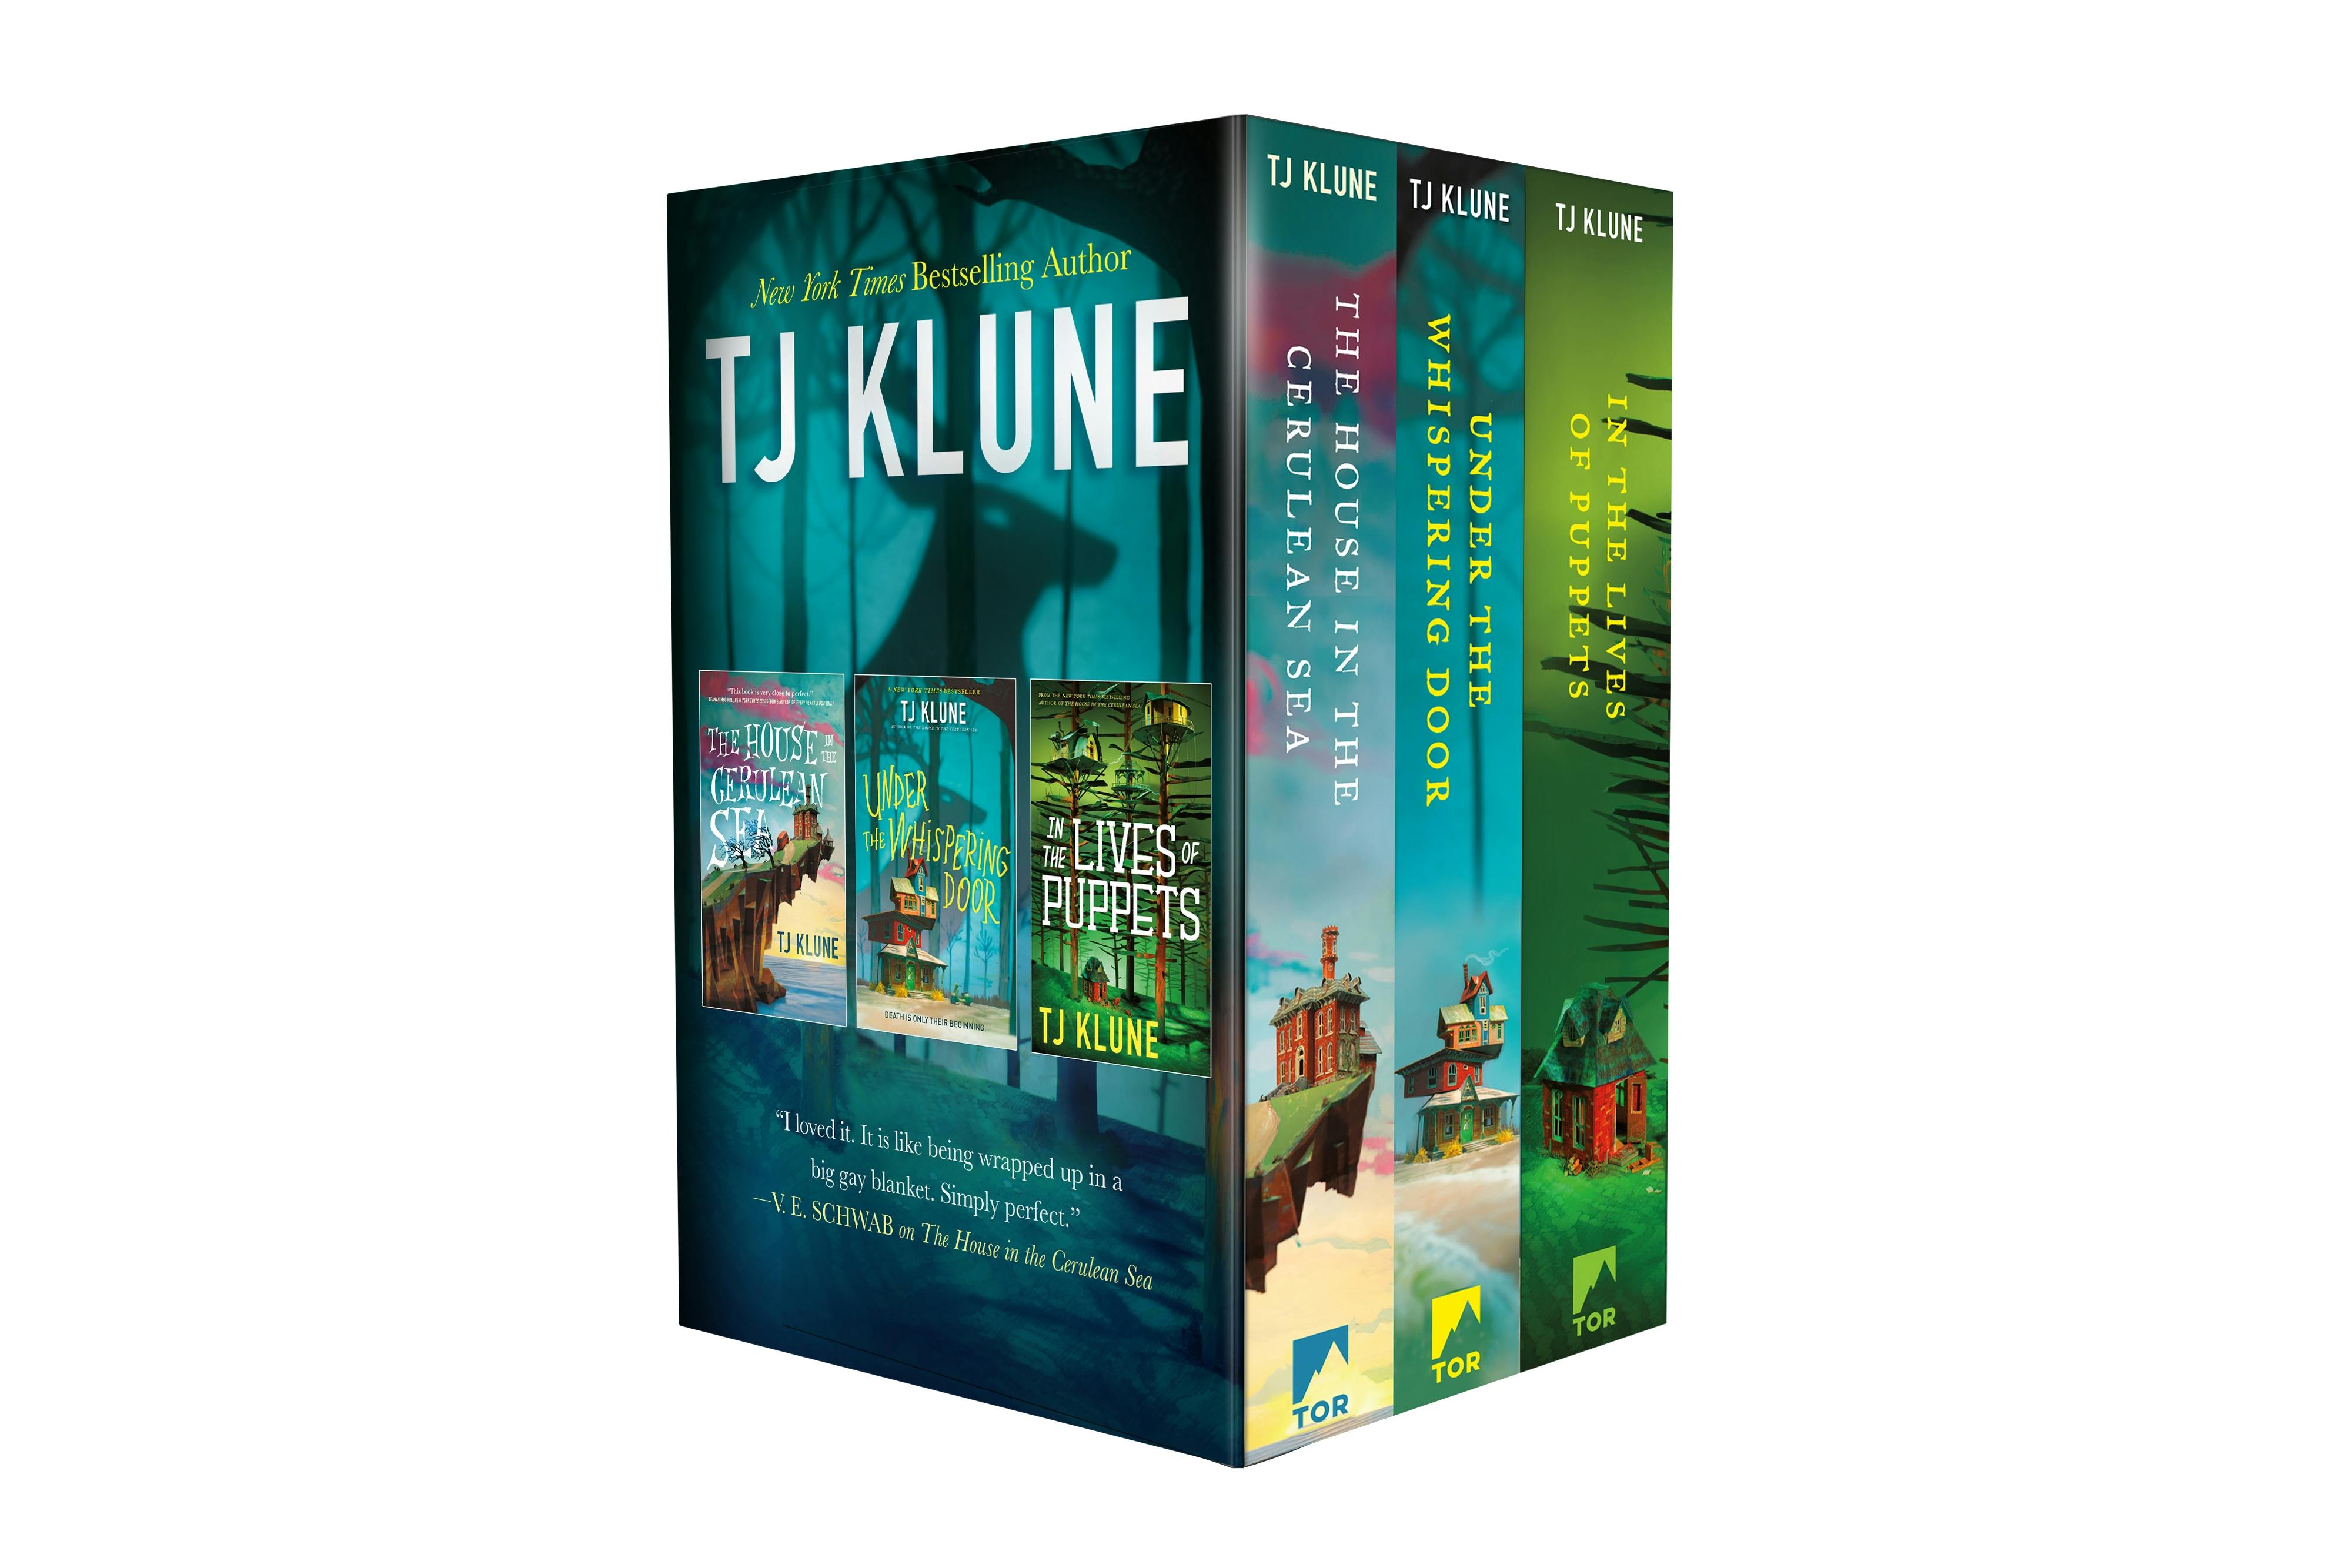 Cover for the book titled as: TJ Klune Trade Paperback Collection